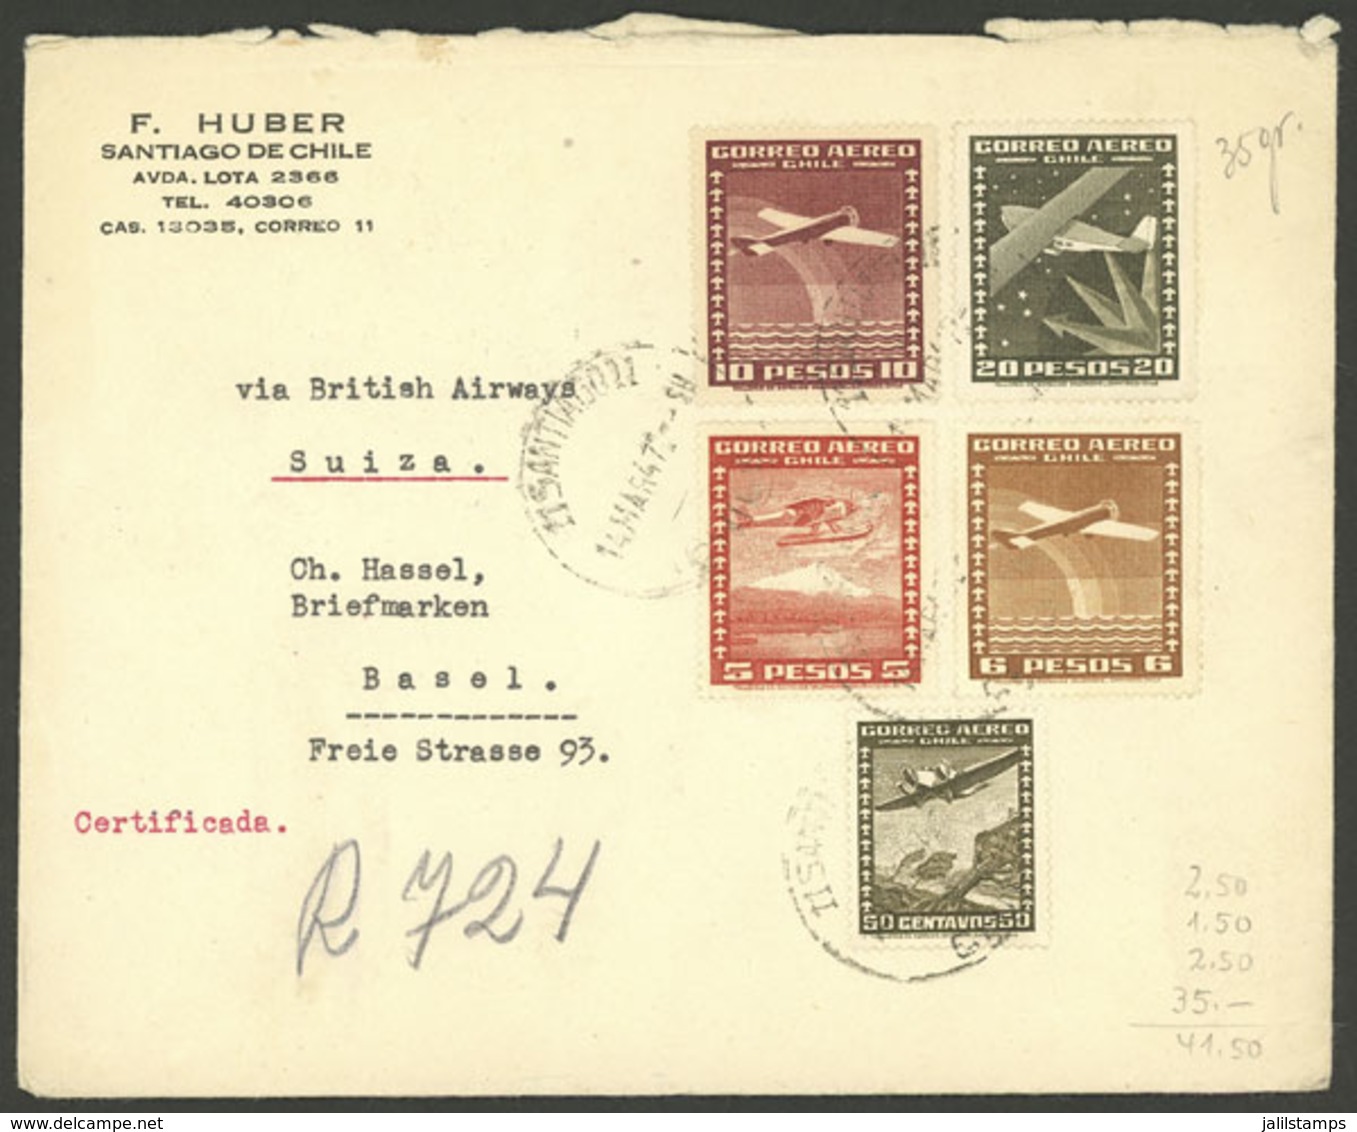 CHILE: Registered Airmail Cover Sent To Switzerland On 14/MAR/1947, Attractive Franking! - Chile